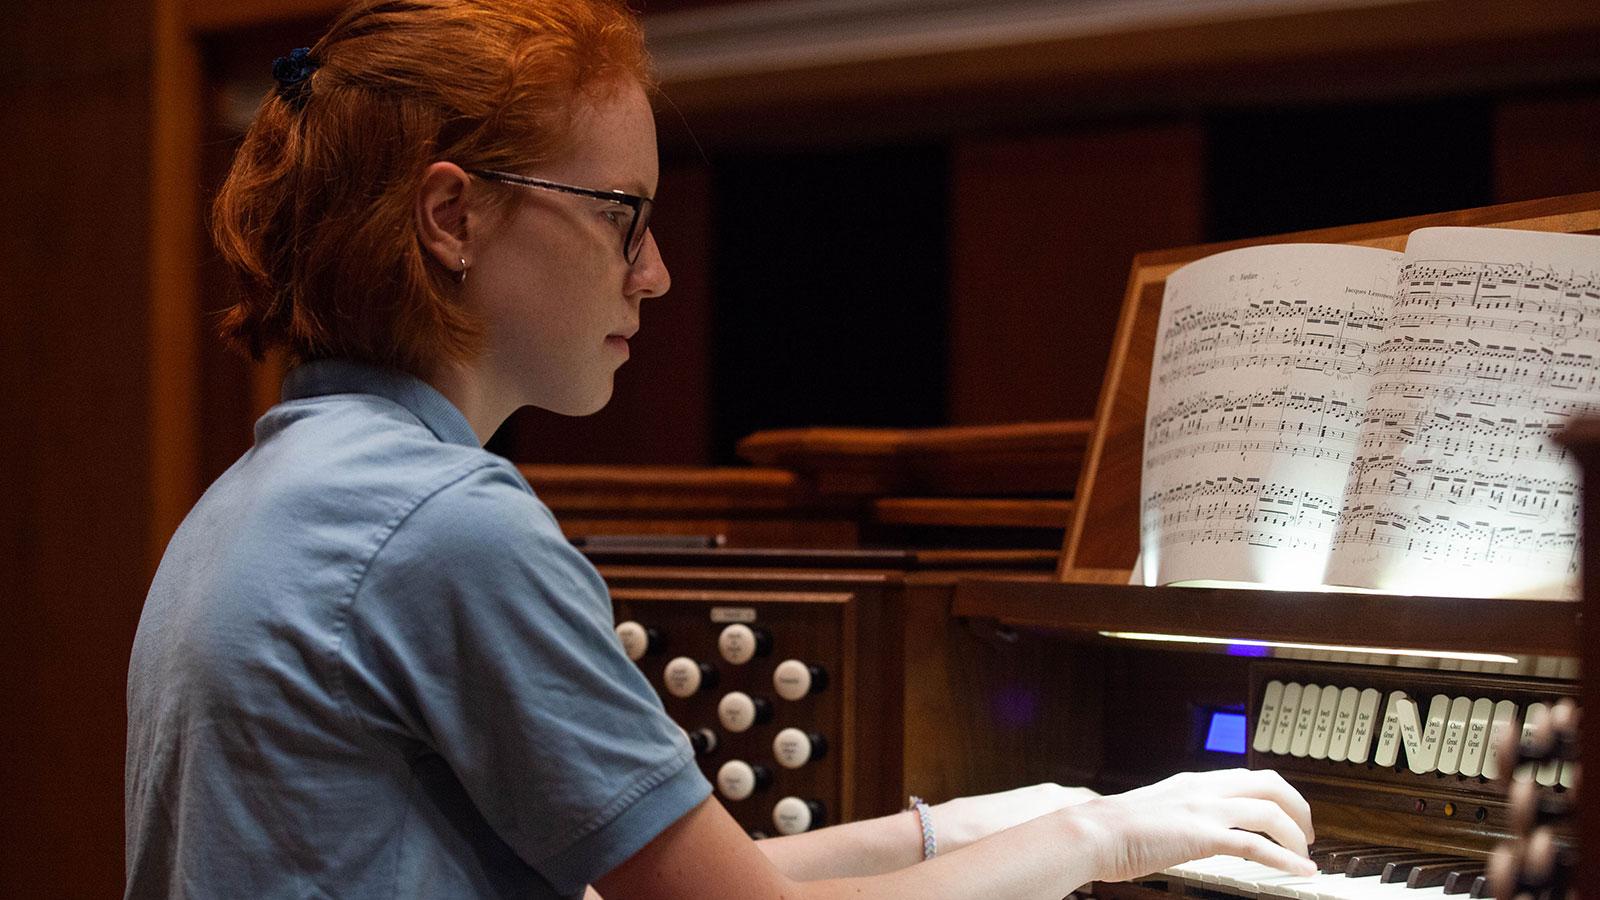 A red-haired girl at an organ